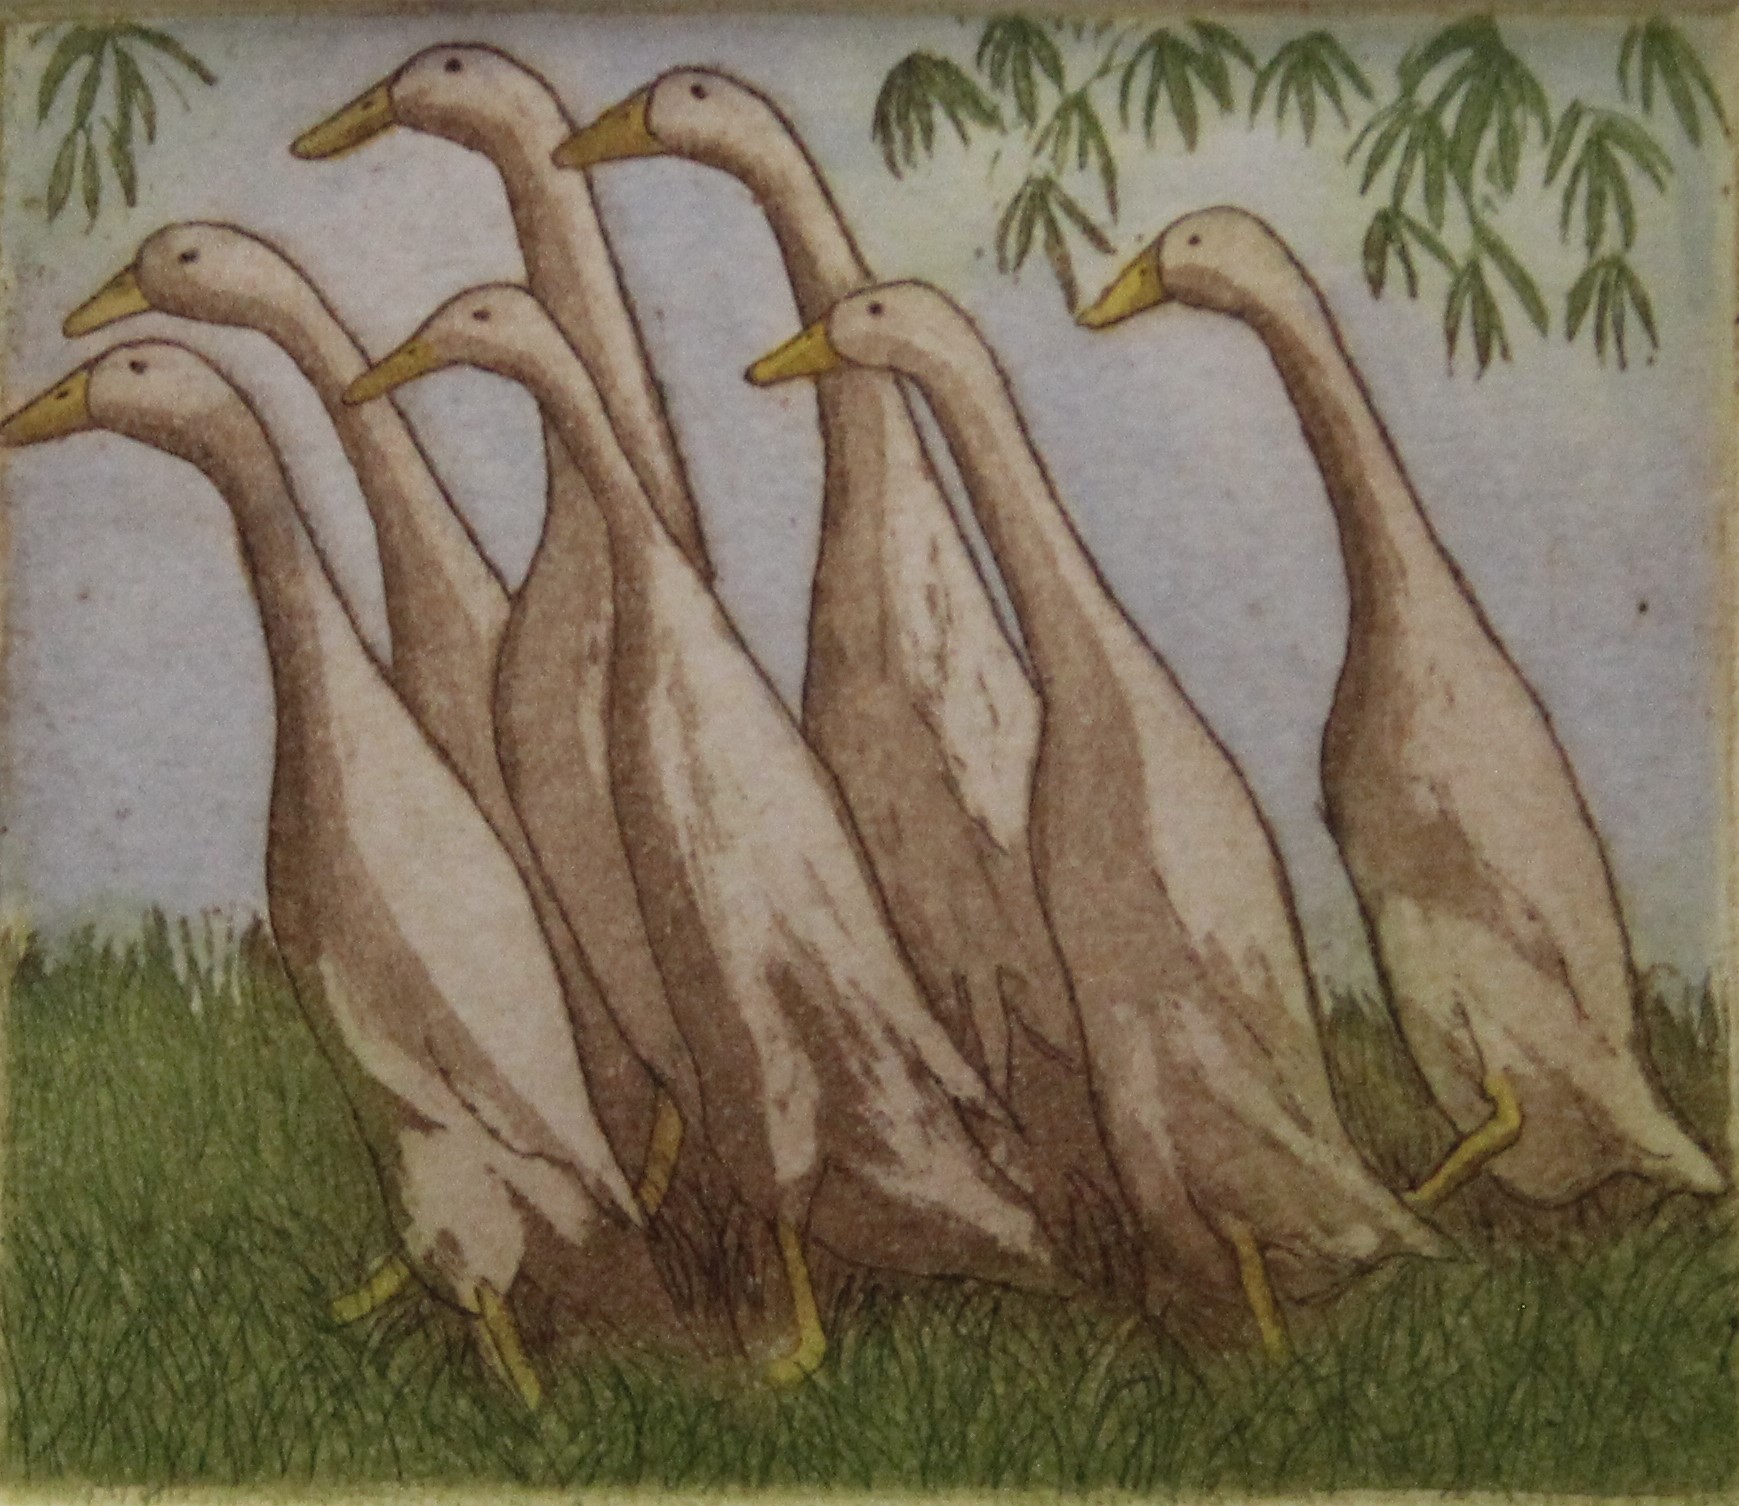 WADE, RICHARD, Indian Runner Ducks, a signed limited edition print, numbered 53/200, signed.